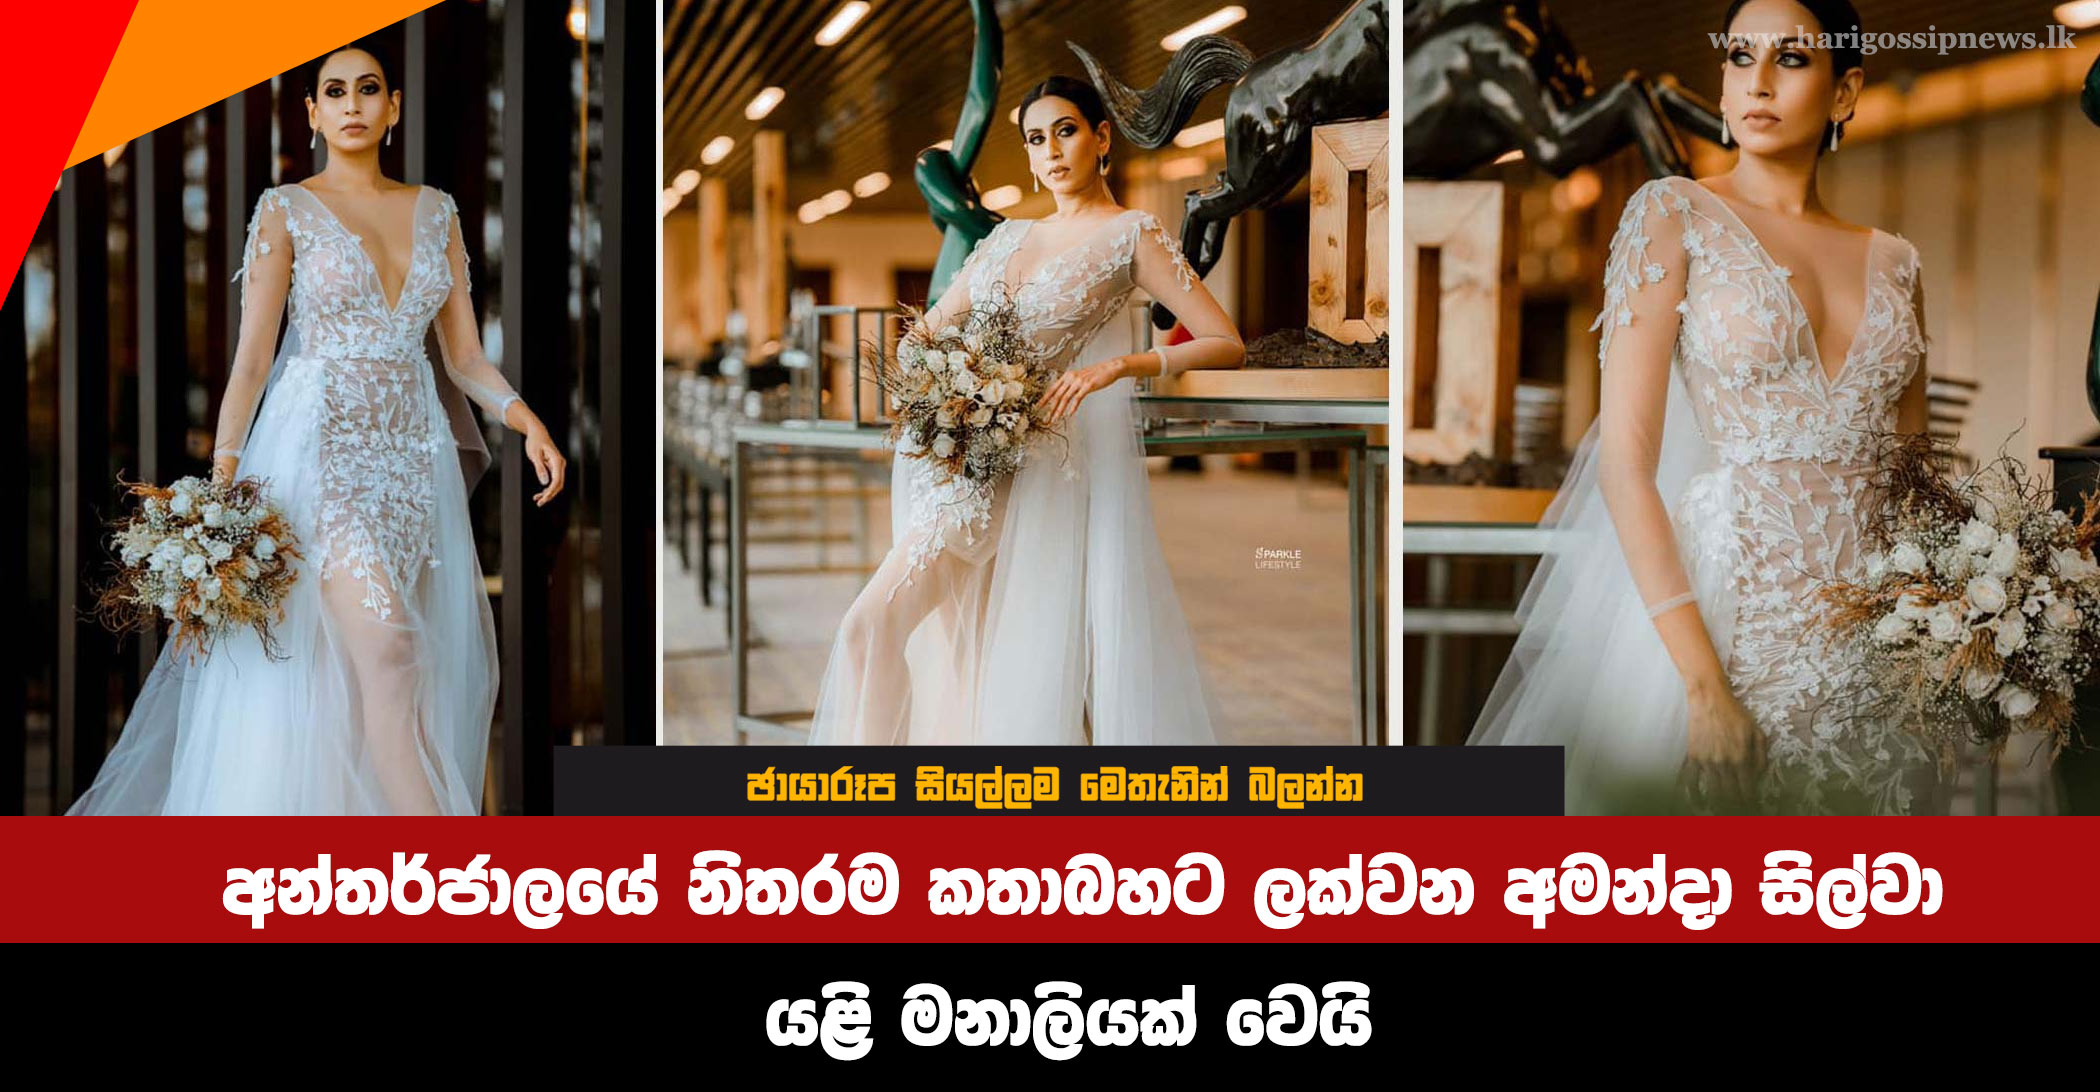 Amanda-Silva,-who-is-often-talked-about-on-the-internet,-will-be-a-bride-again